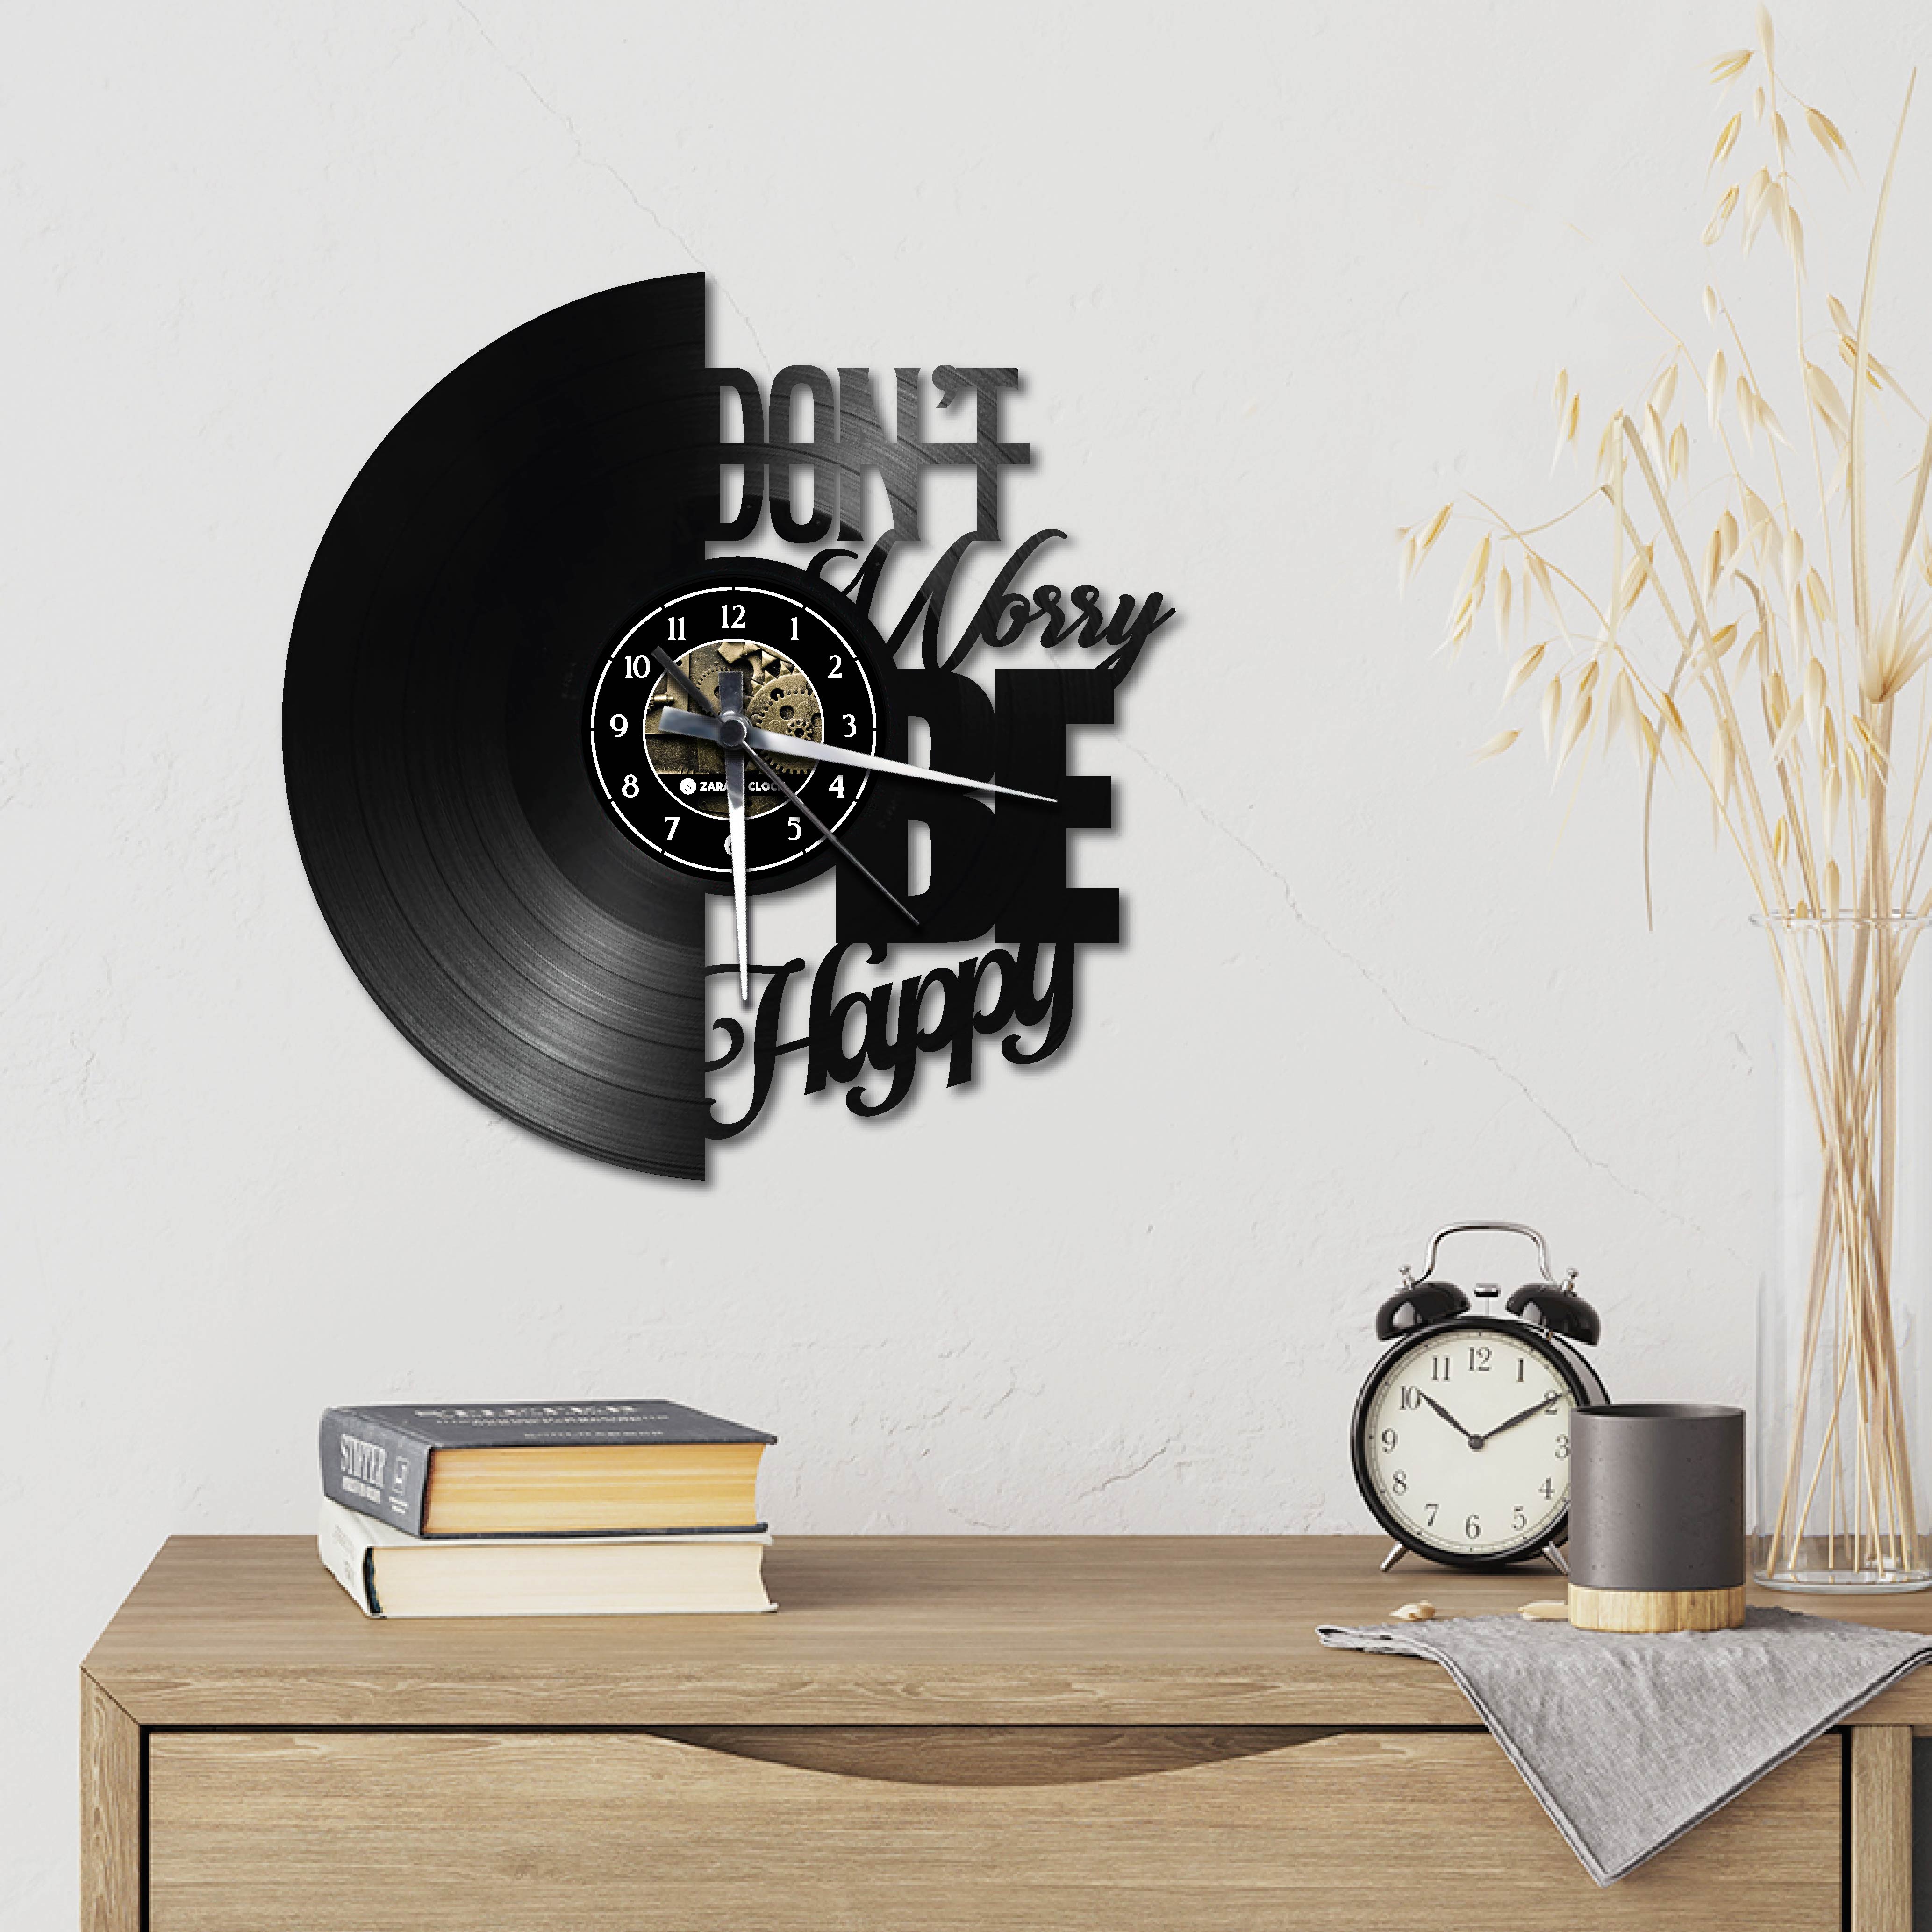 DON'T WARRY BE HAPPY ✦ orologio in vinile